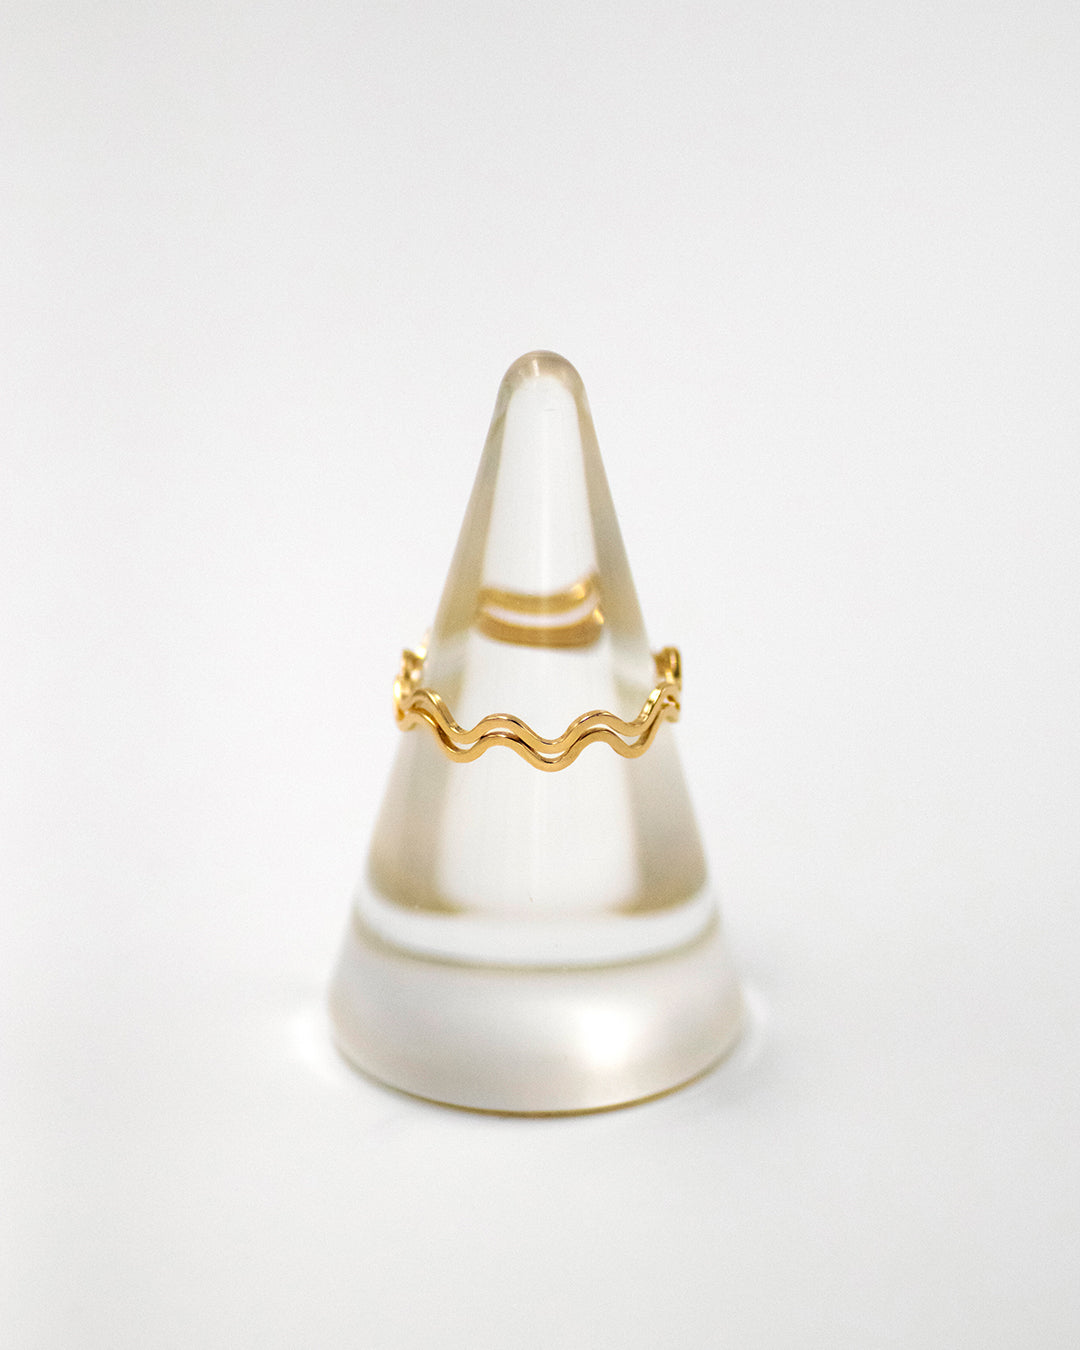 IDAMARI Unna Wave Ring in 18k Gold Plated Sterling Silver